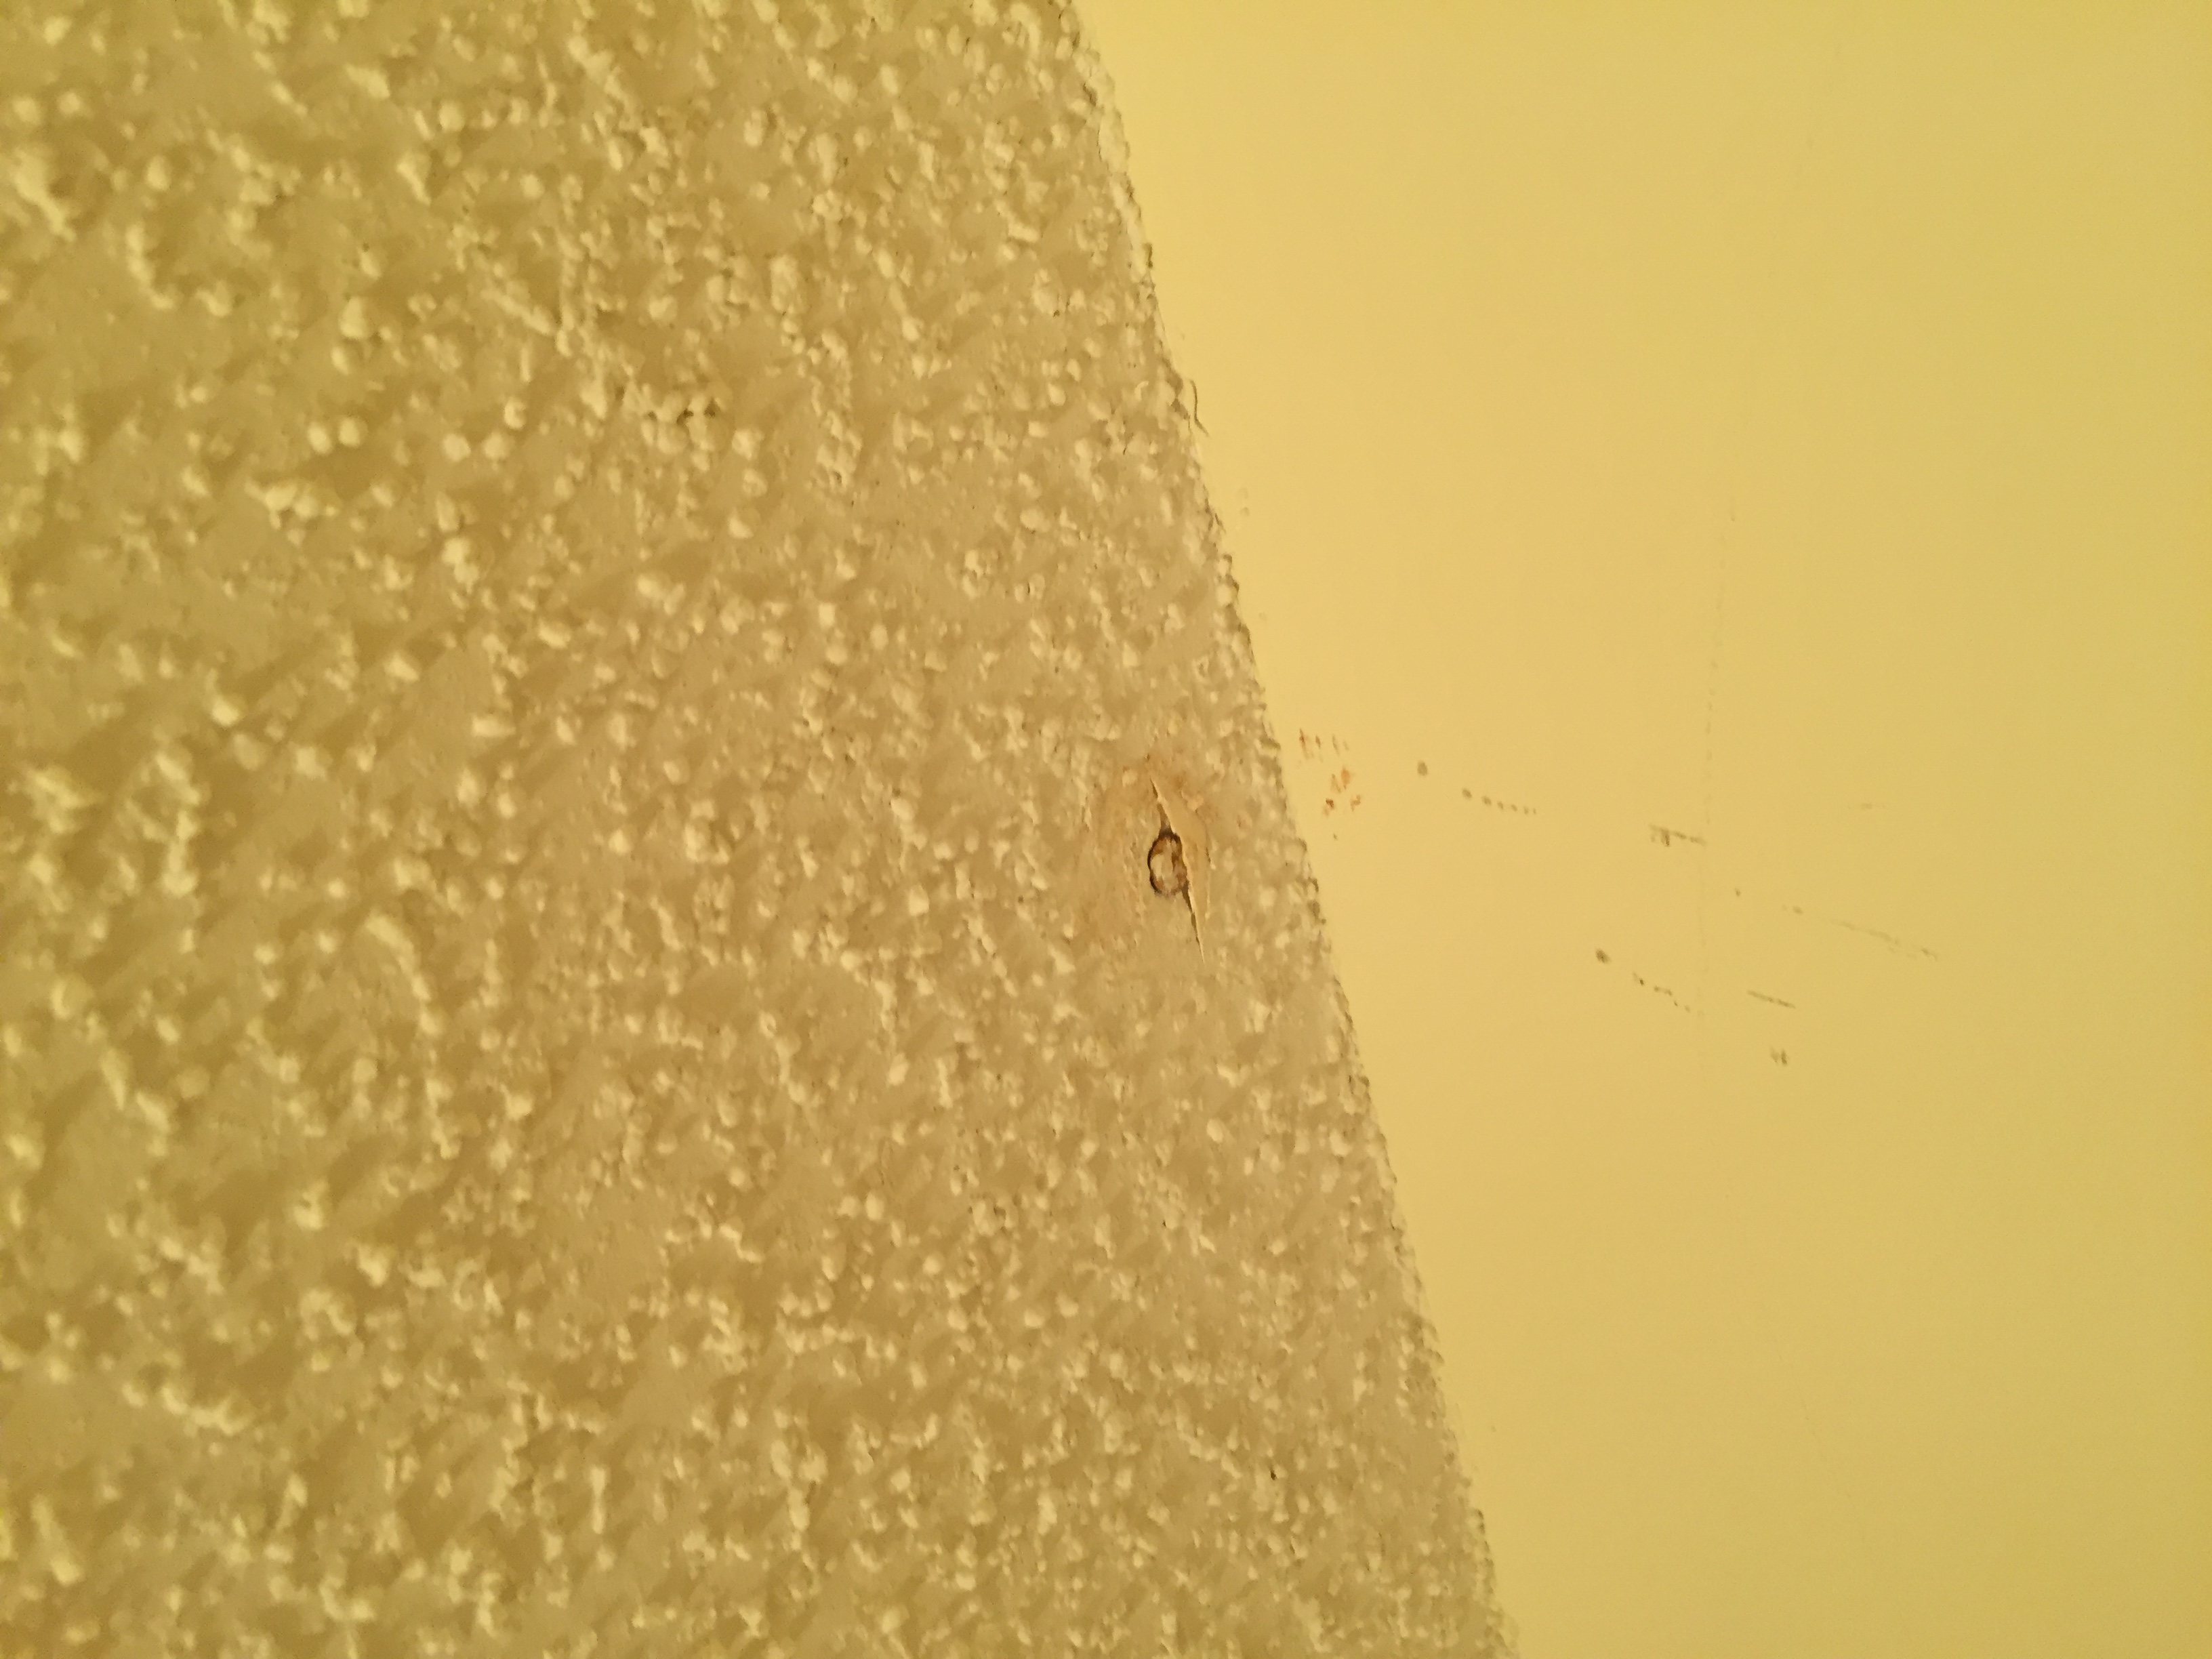 Nail popping out of hall way bathroom ceiling 